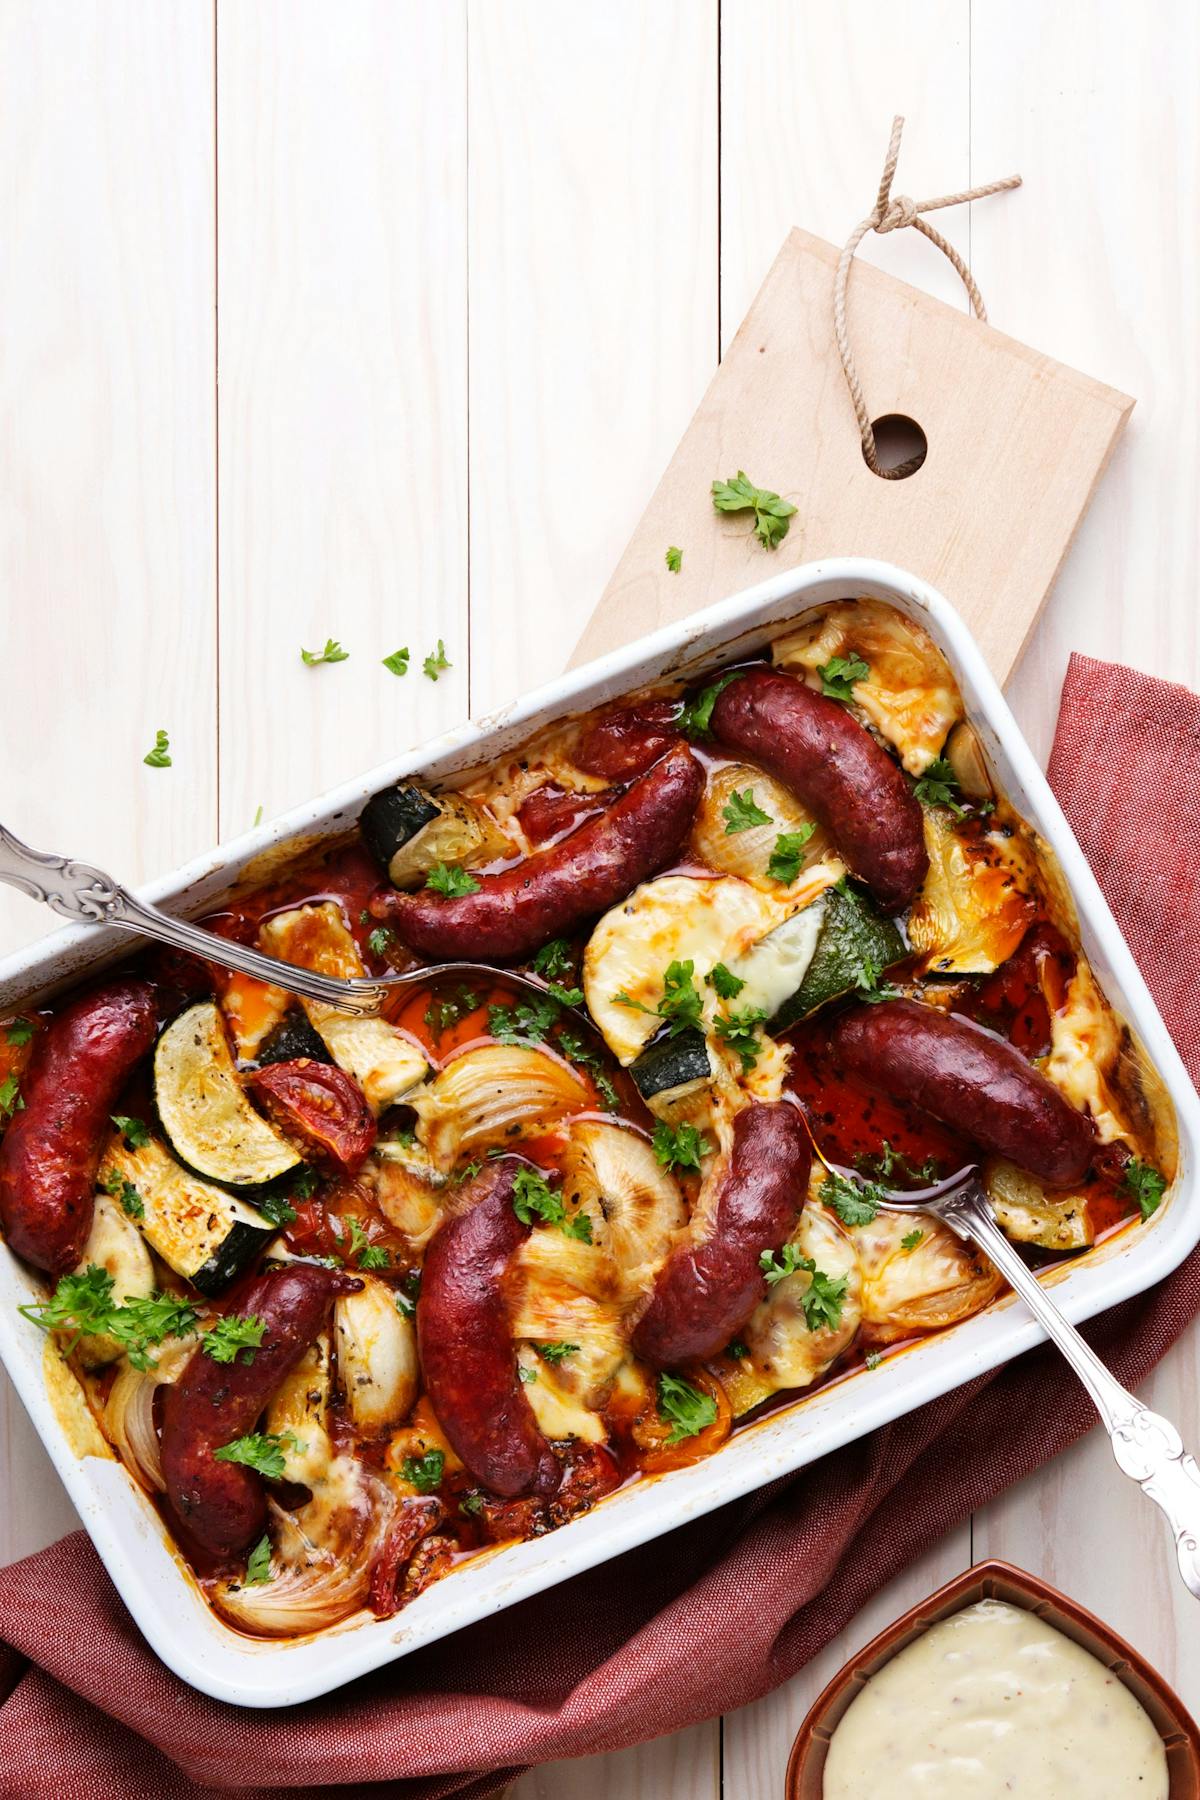 Oven-baked sausage with veggies